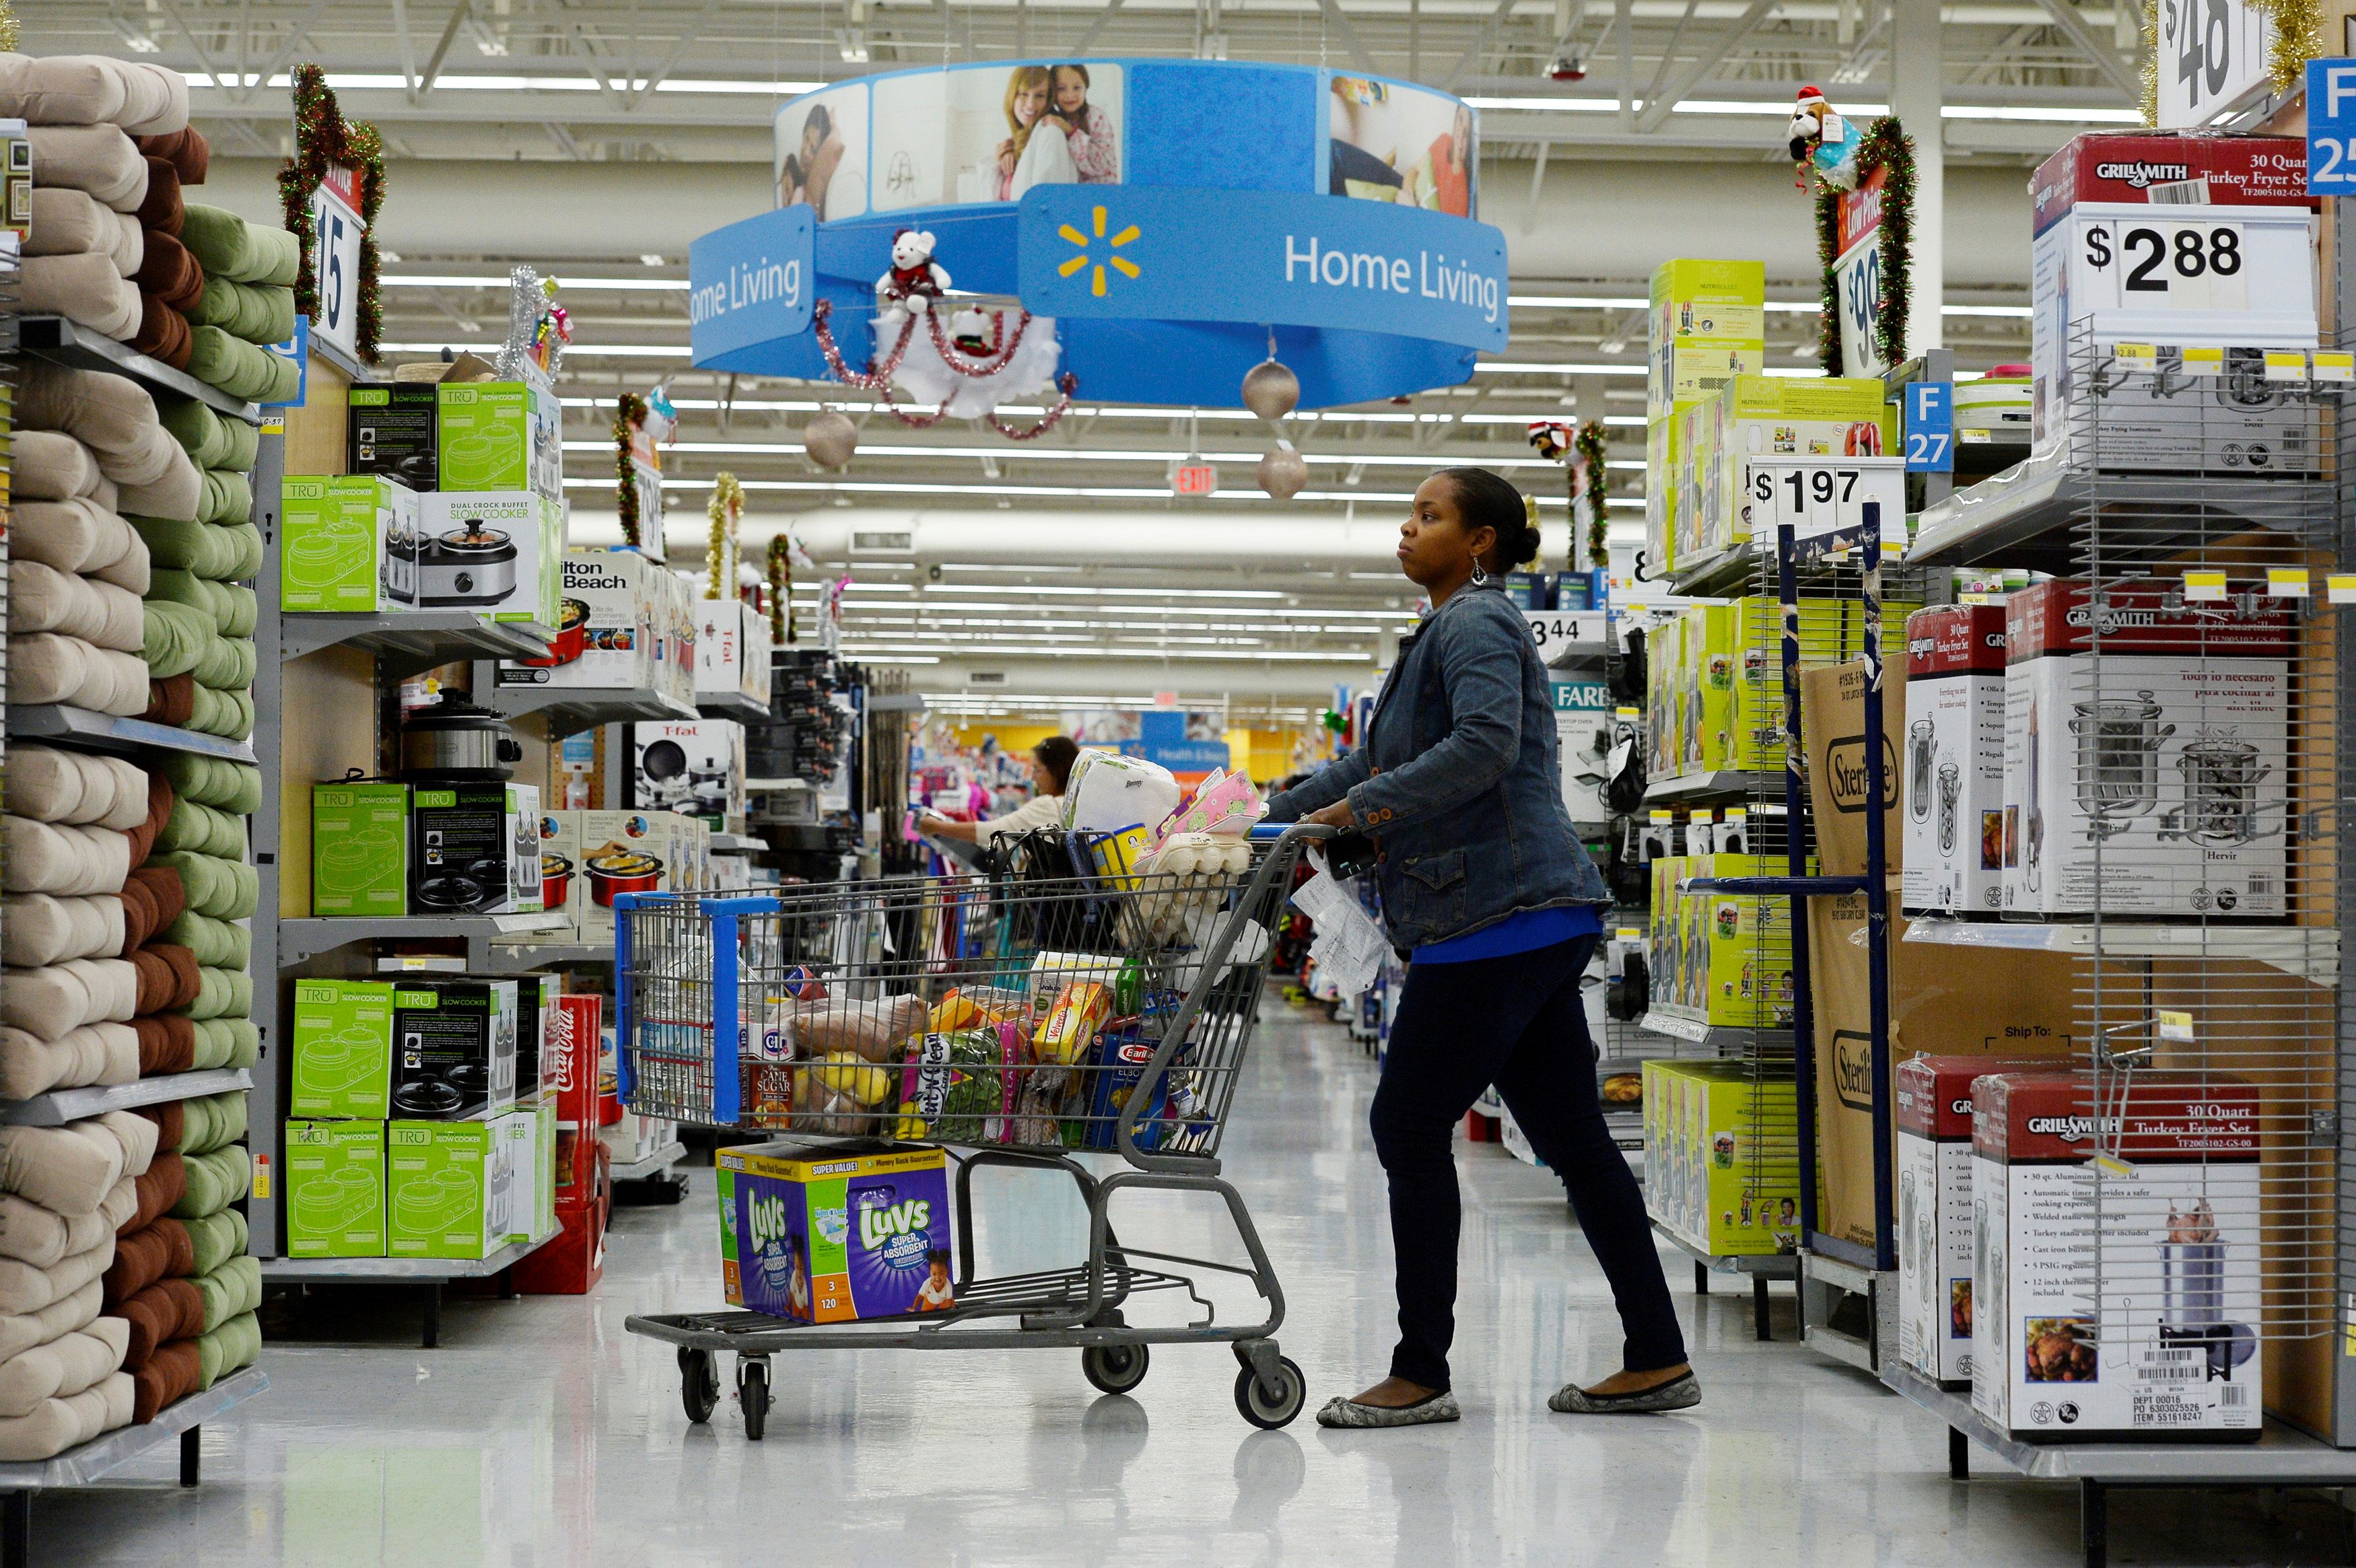 A customer pushes her shopping cart through the aisles at a Walmart store in the Porter Ranch section of Los Angeles November 26, 2013. REUTERS/Kevork Djansezian